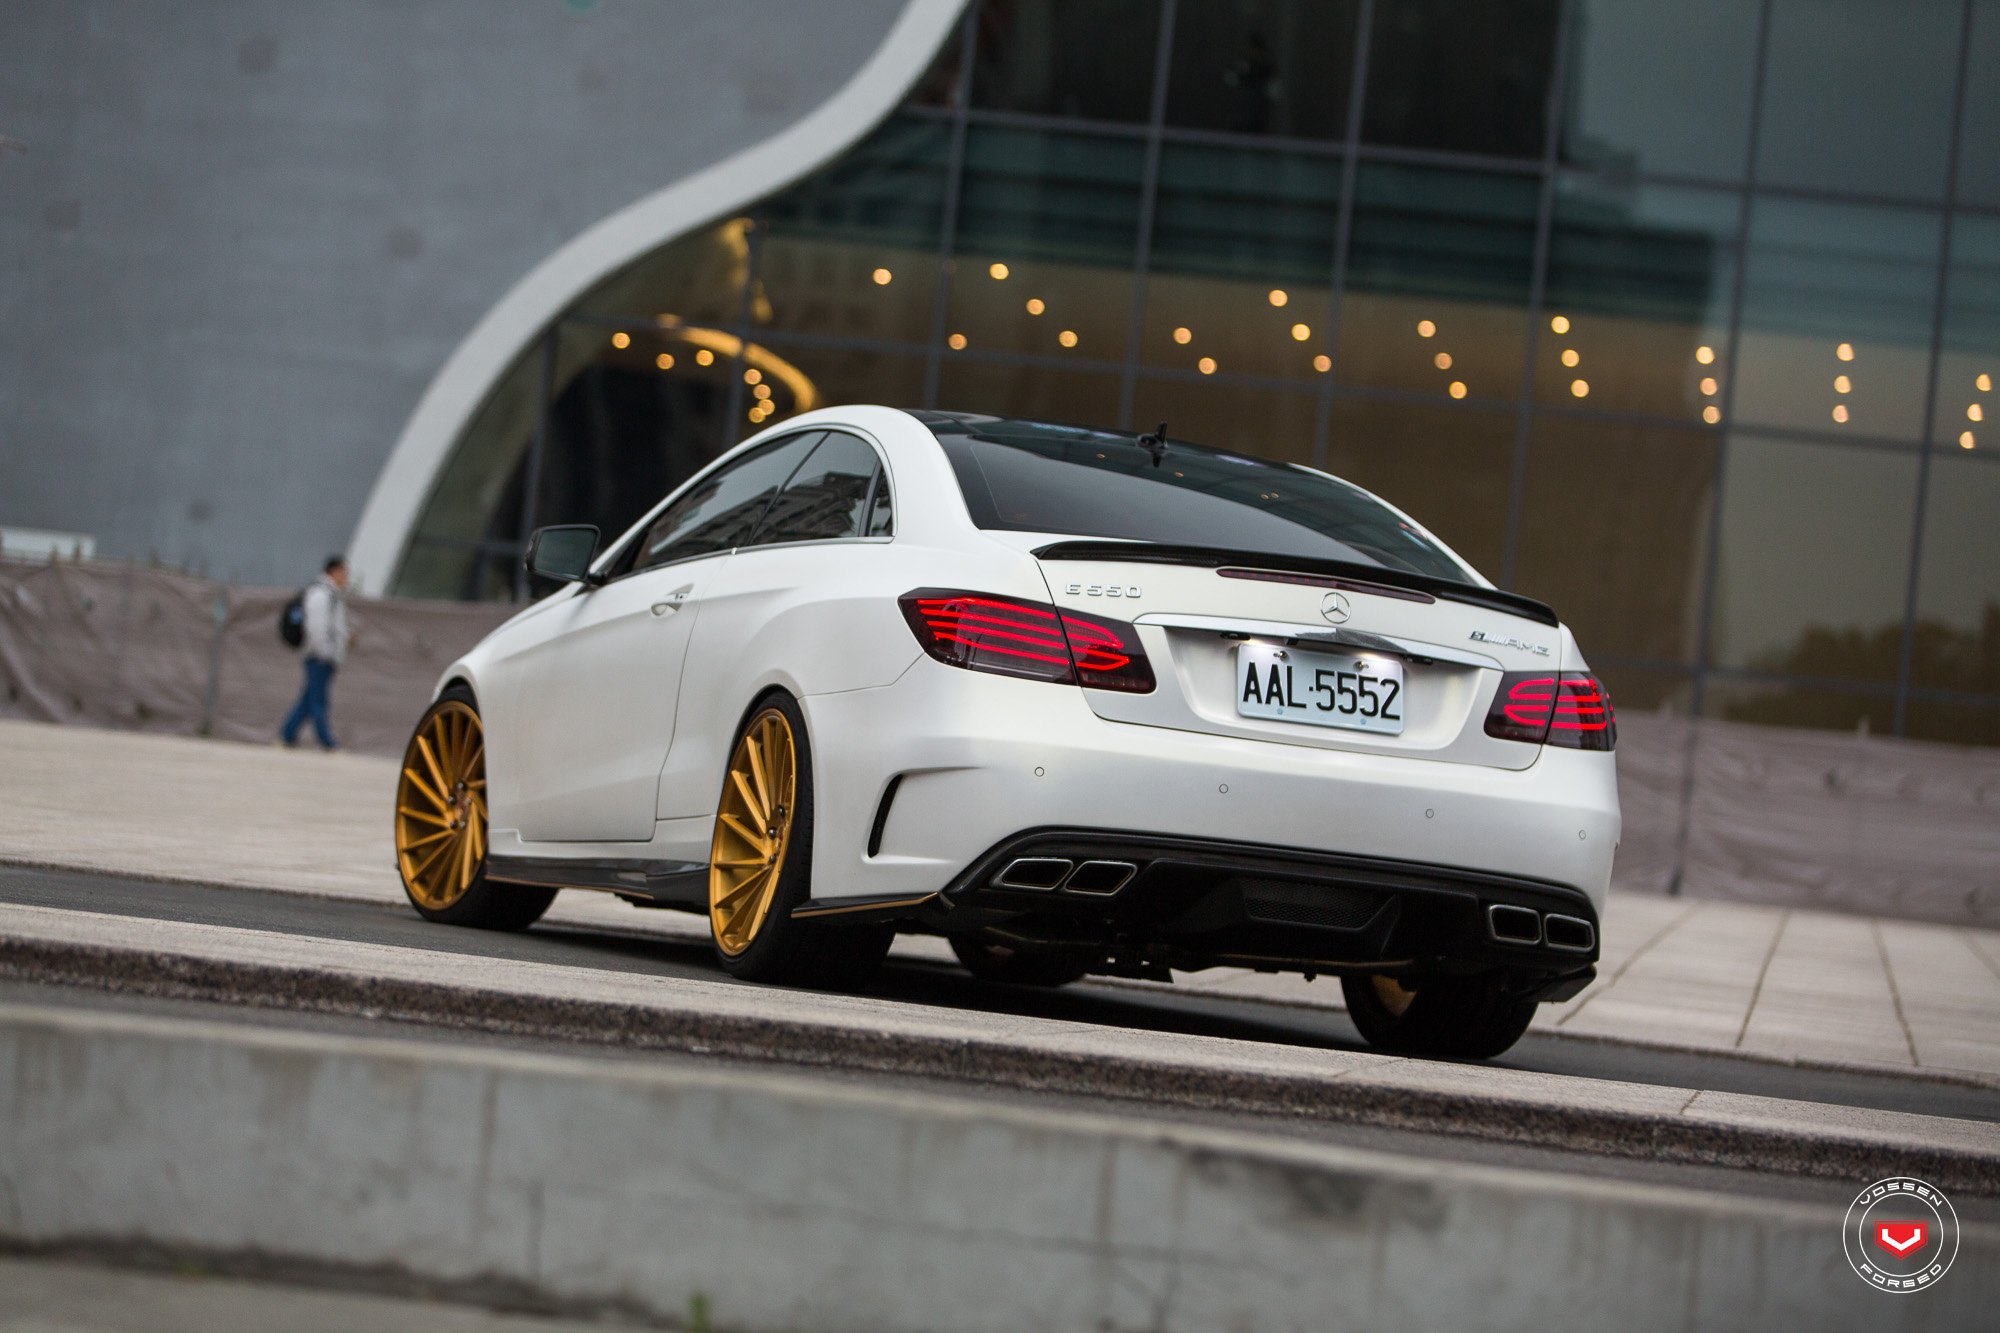 Aftermarket Red LED Taillights on White Mercedes E-Class - Photo by Vossen